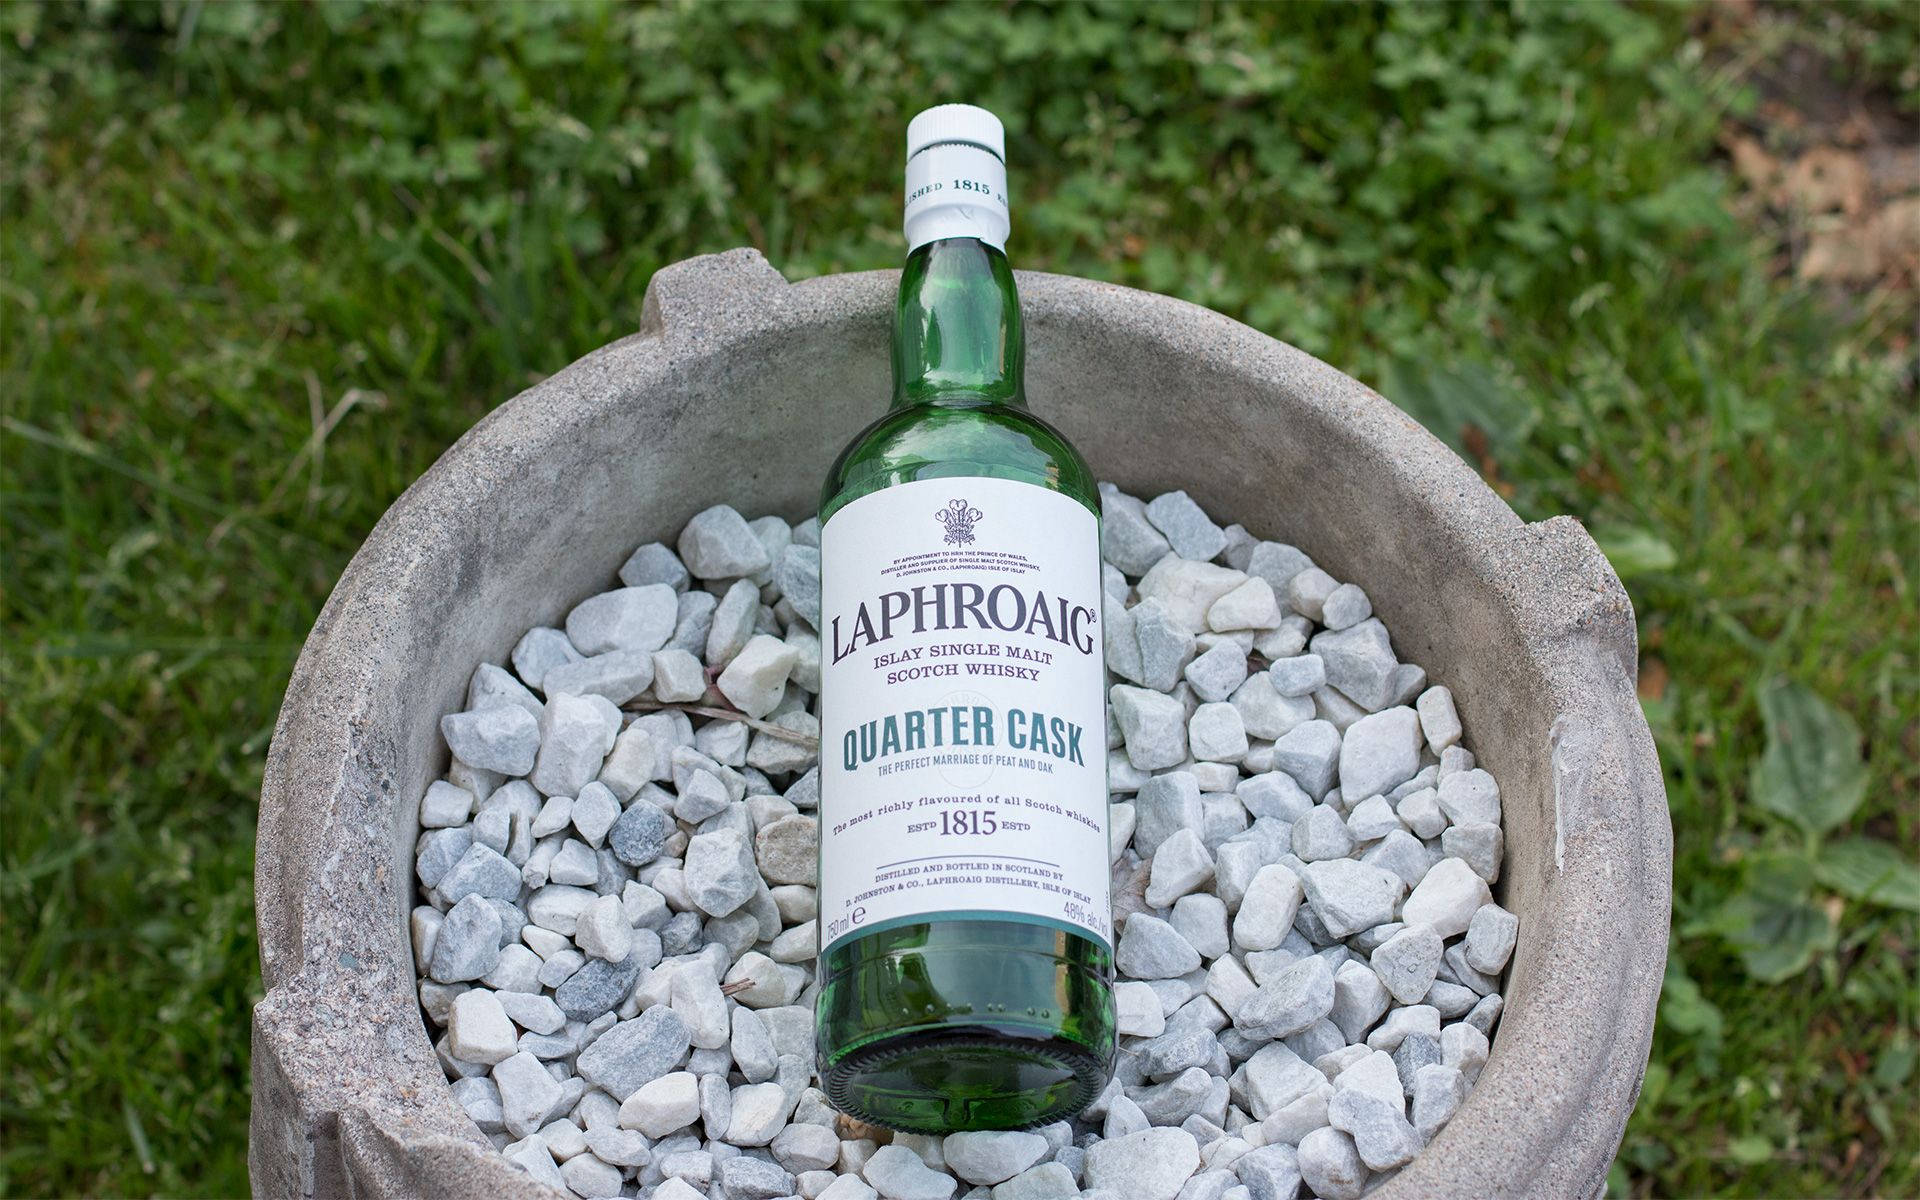 Laphroaig Quarter Cask Wishky On Grill Picture